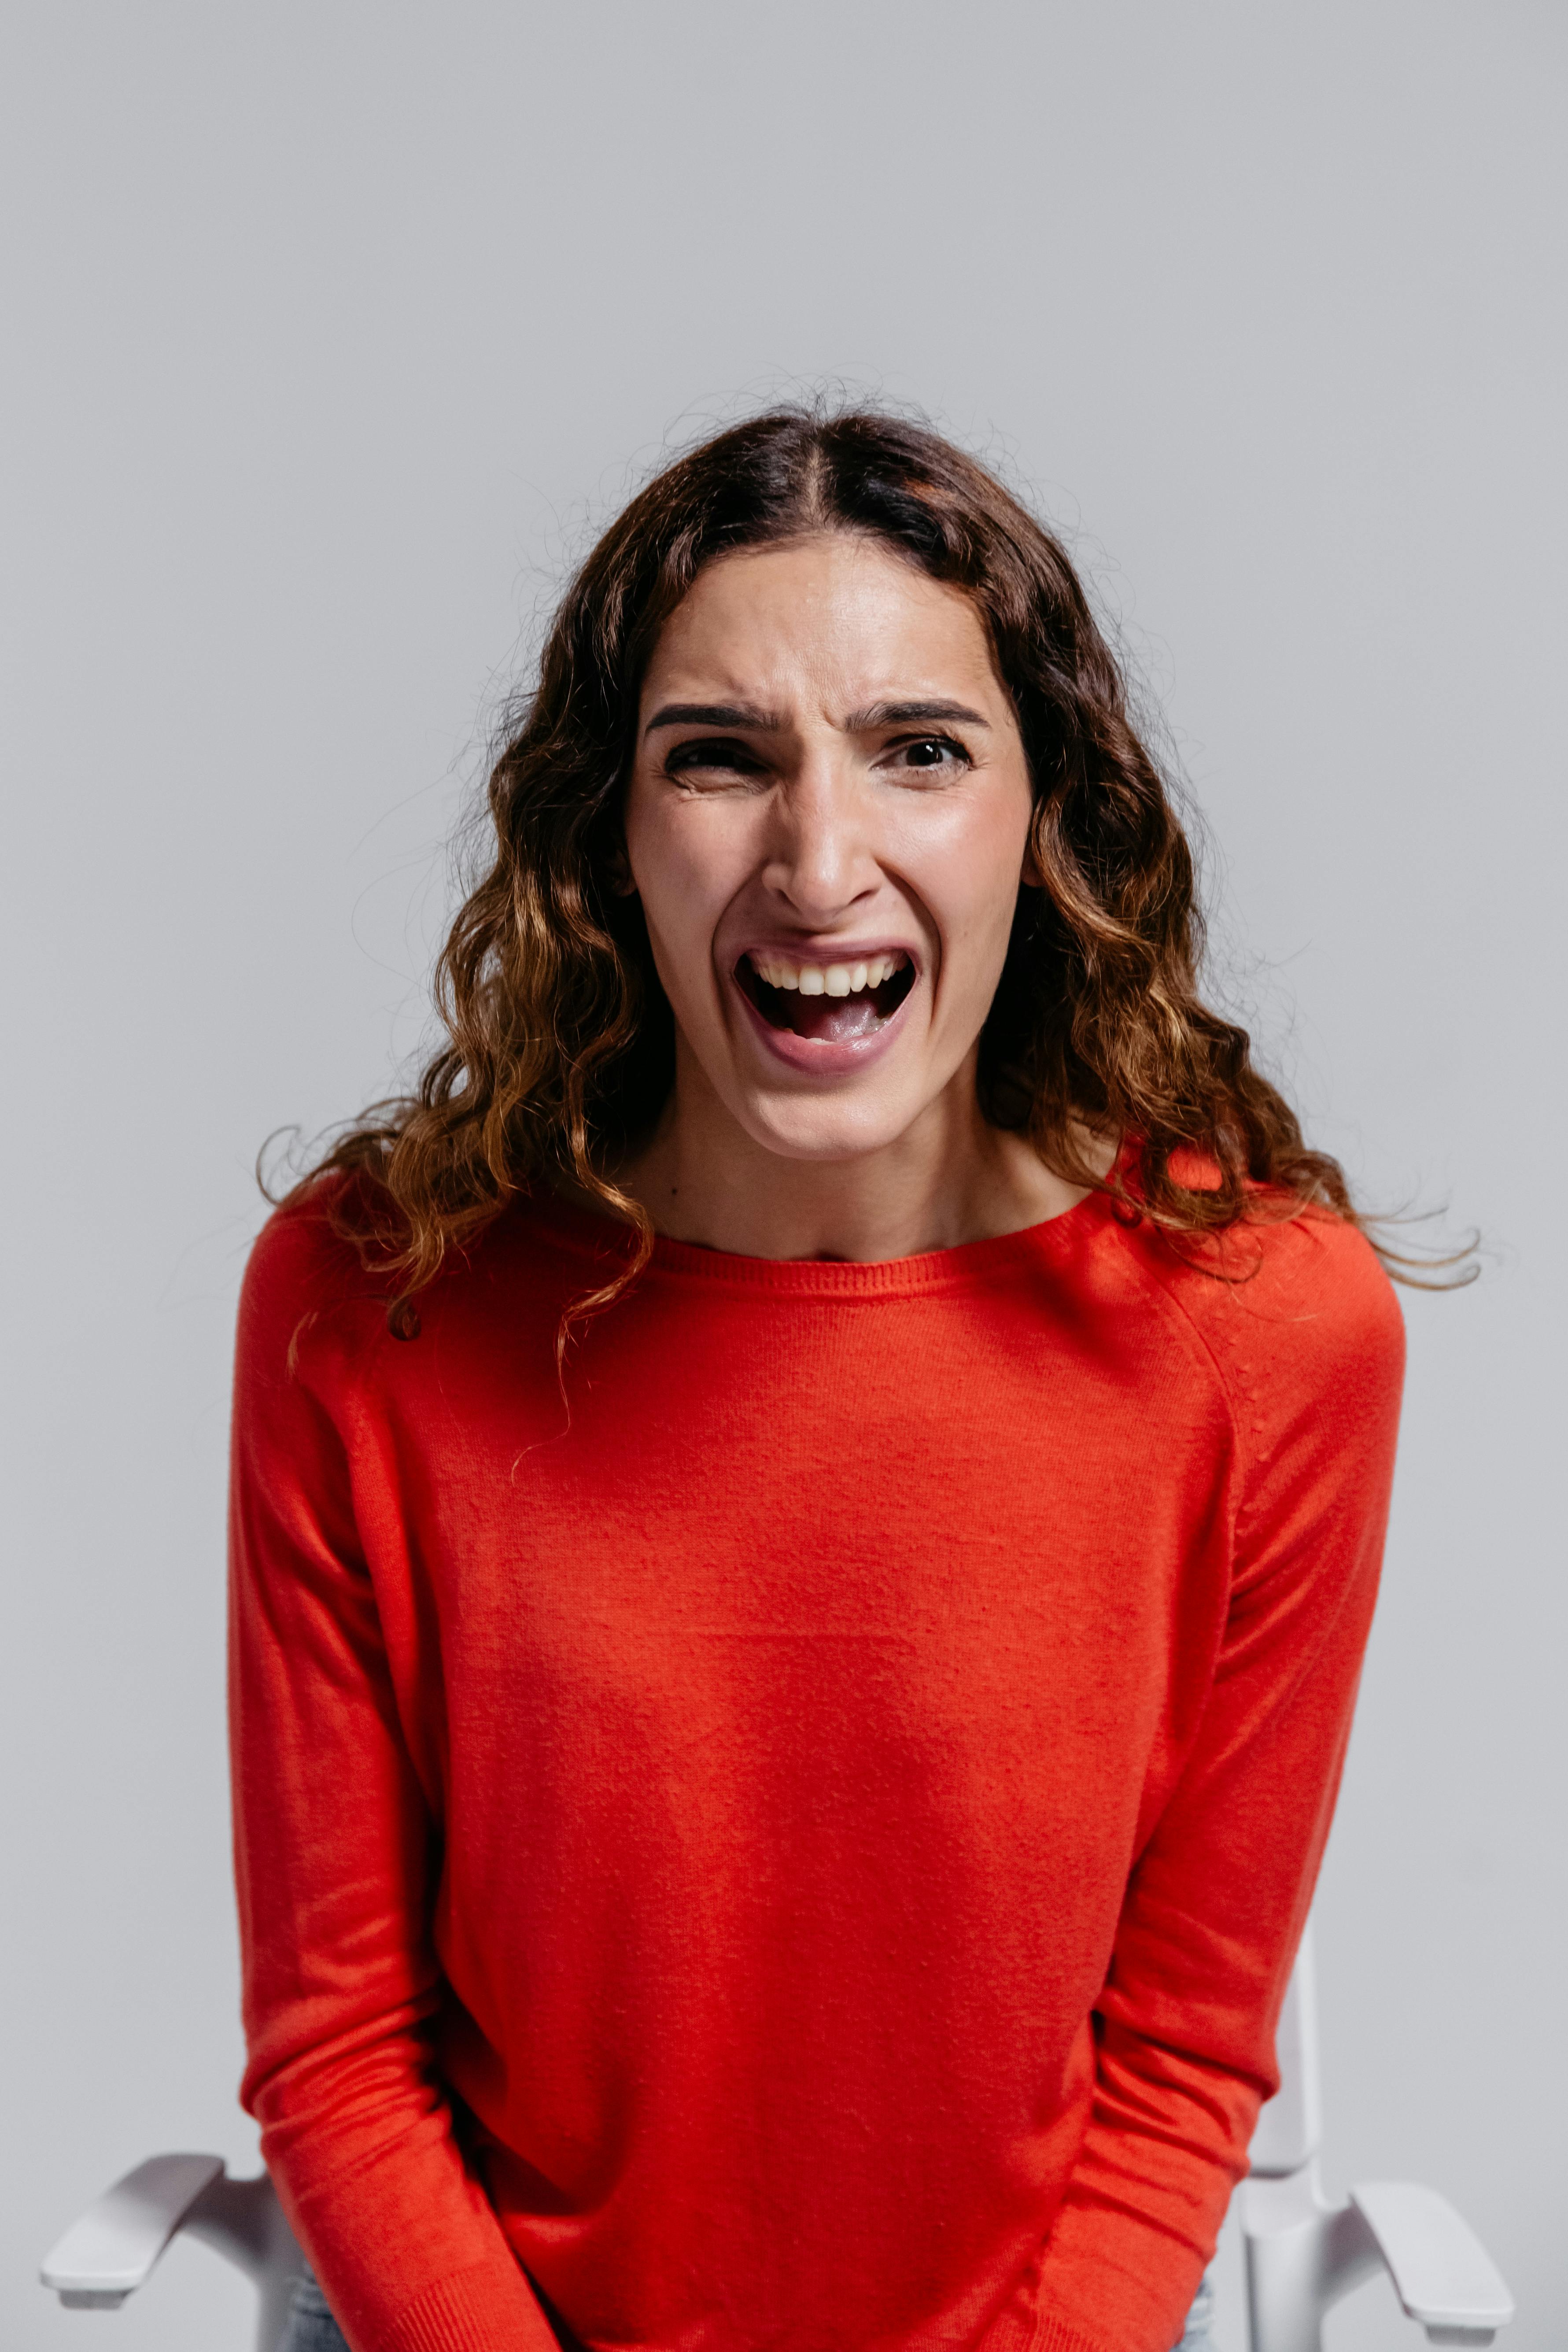 Angry shouting woman | Source: Pexels